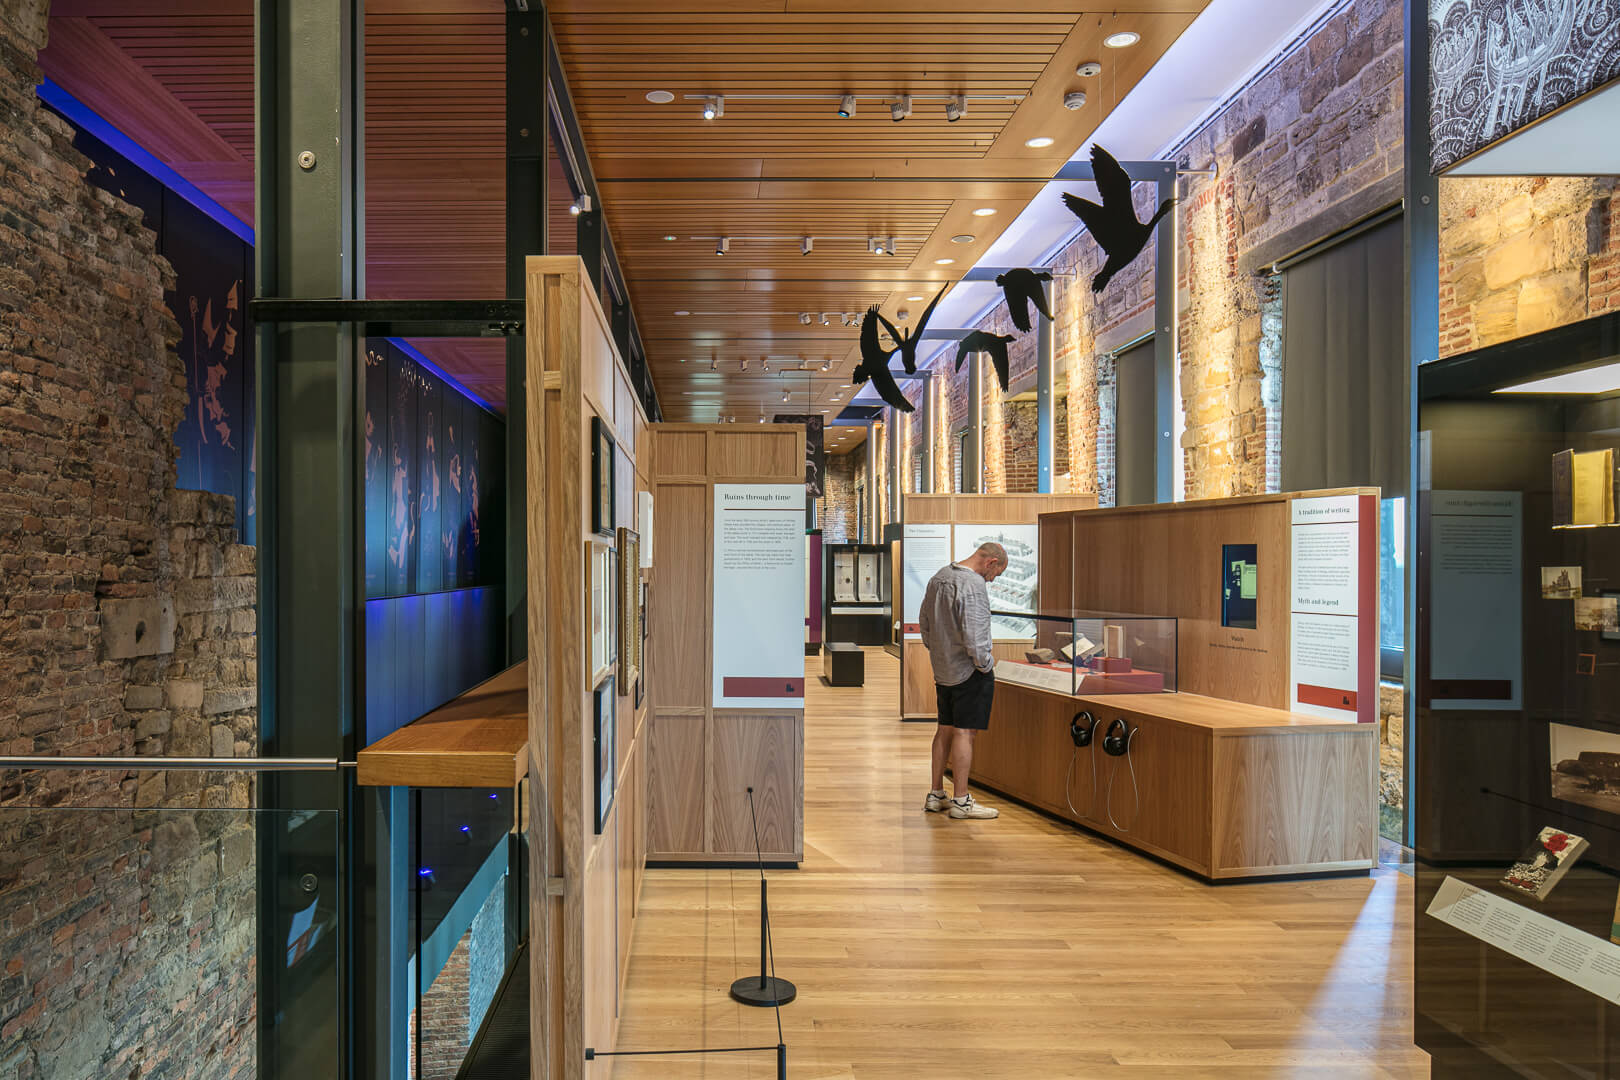 Commercial architectural interior photography at Whitby Abbey Visitors' Centre, Yorkshire